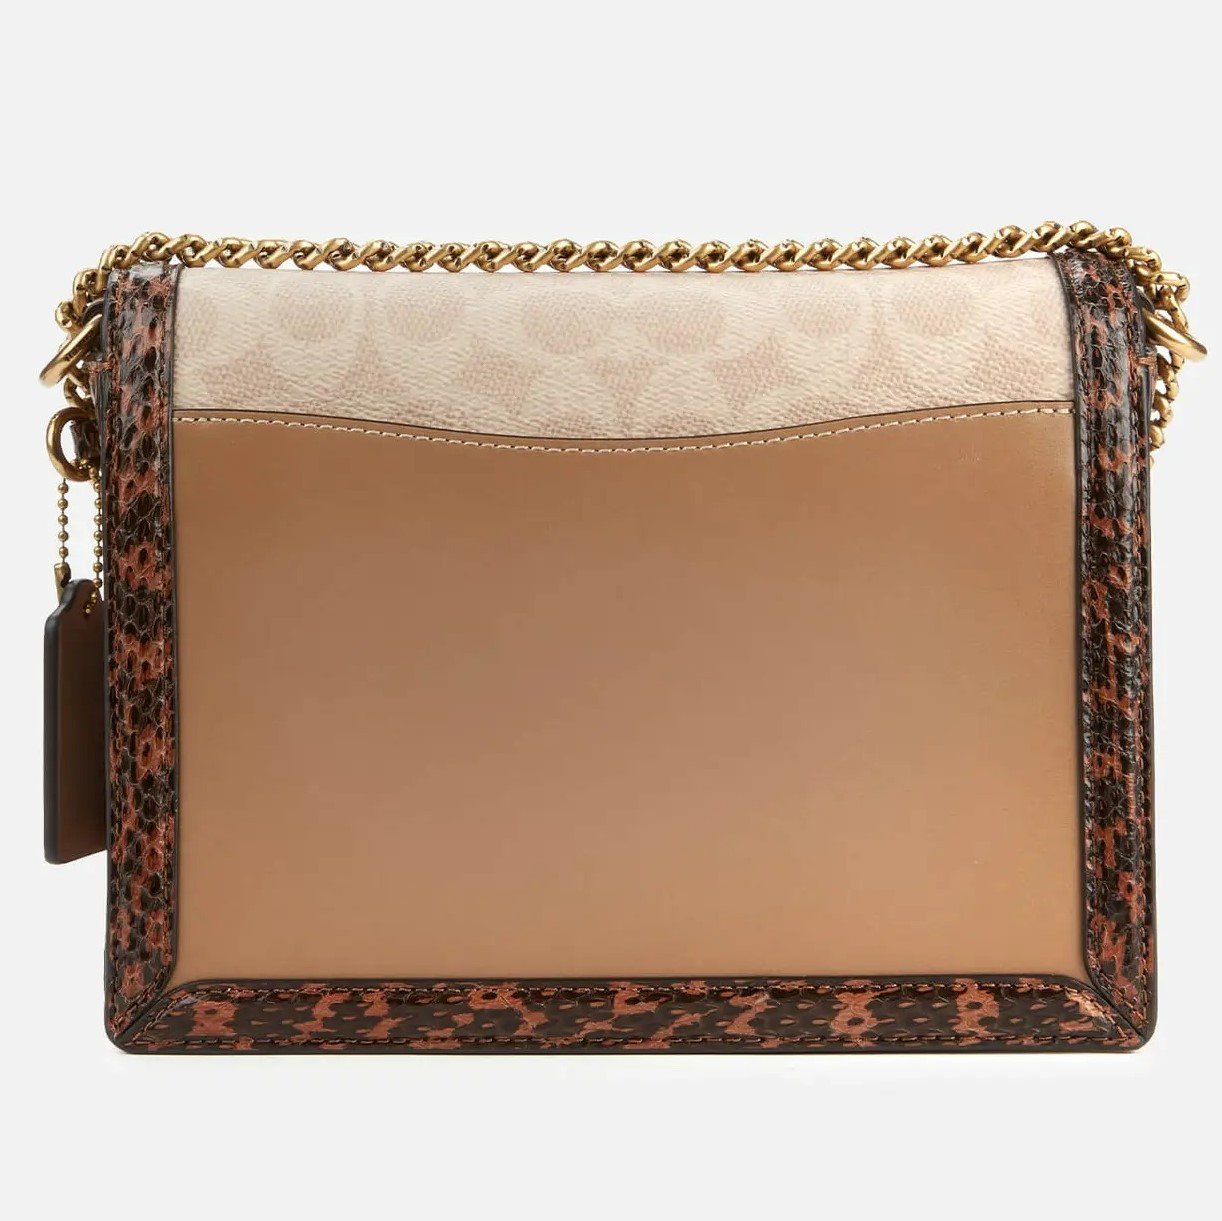 TÚI ĐEO VAI NỮ COACH HUTTON SHOULDER BAG IN BLOCKED SIGNATURE CANVAS WITH SNAKESKIN DETAIL 13